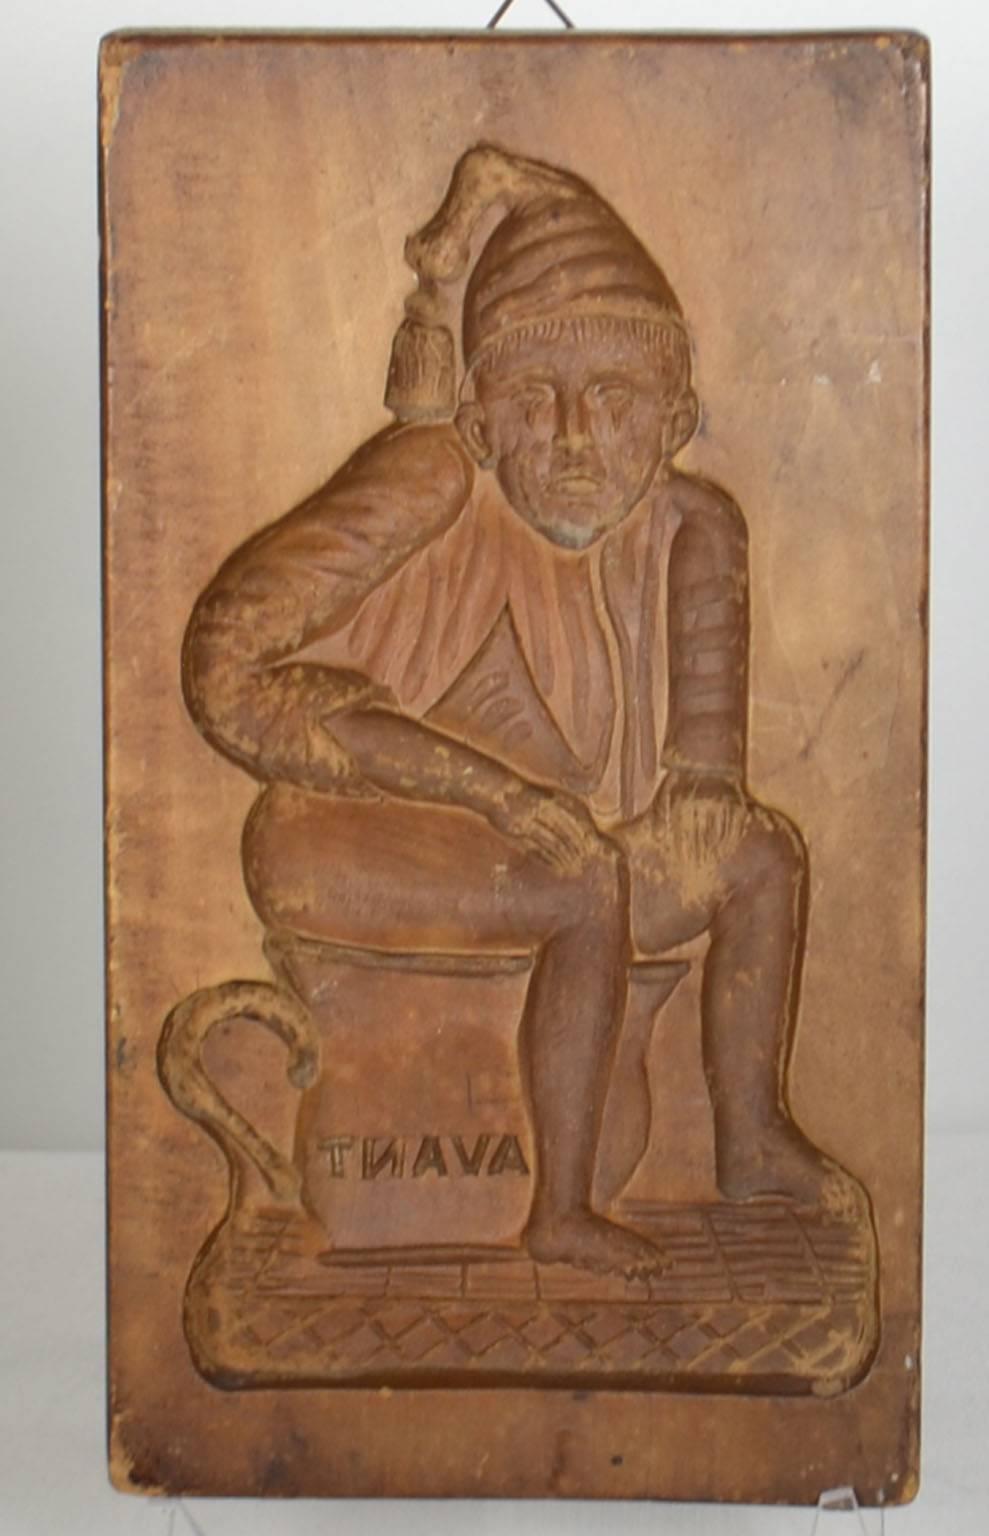 Wooden gingerbread mold (seated man).